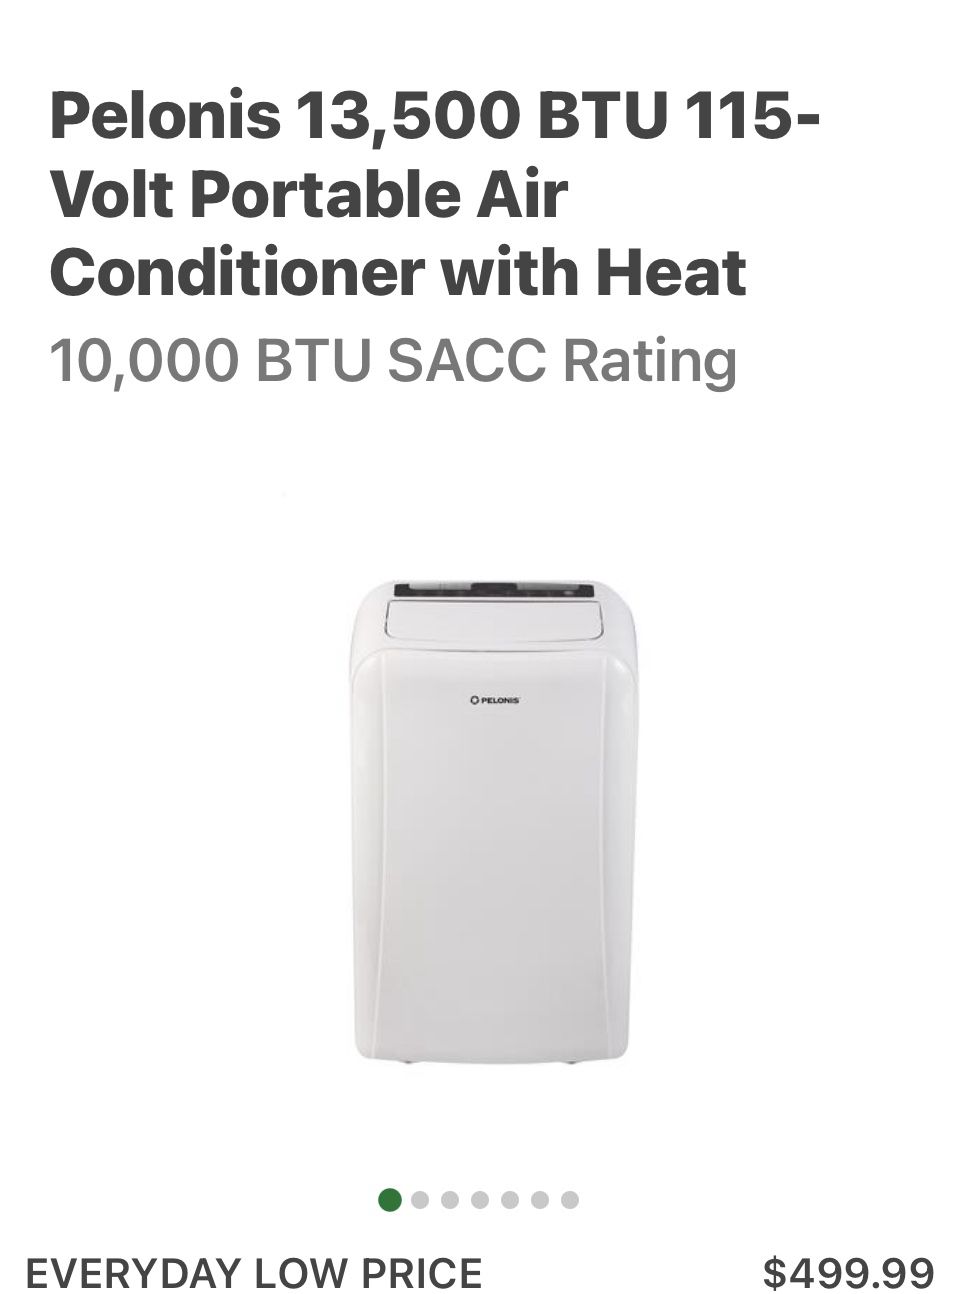 Portable Air Conditioner With Heat. New